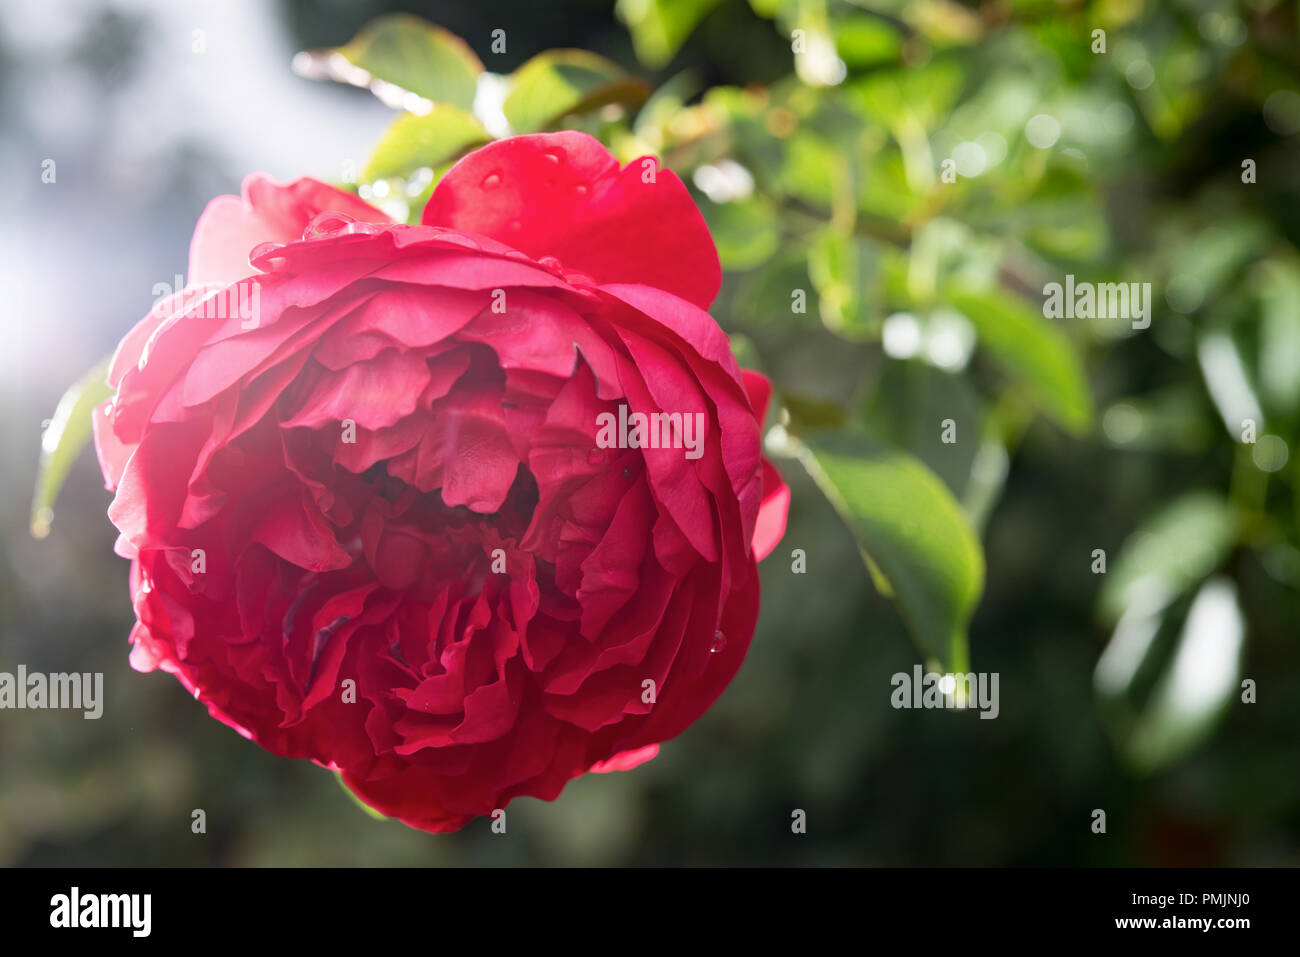 Page 2 - Florentina High Resolution Stock Photography and Images - Alamy